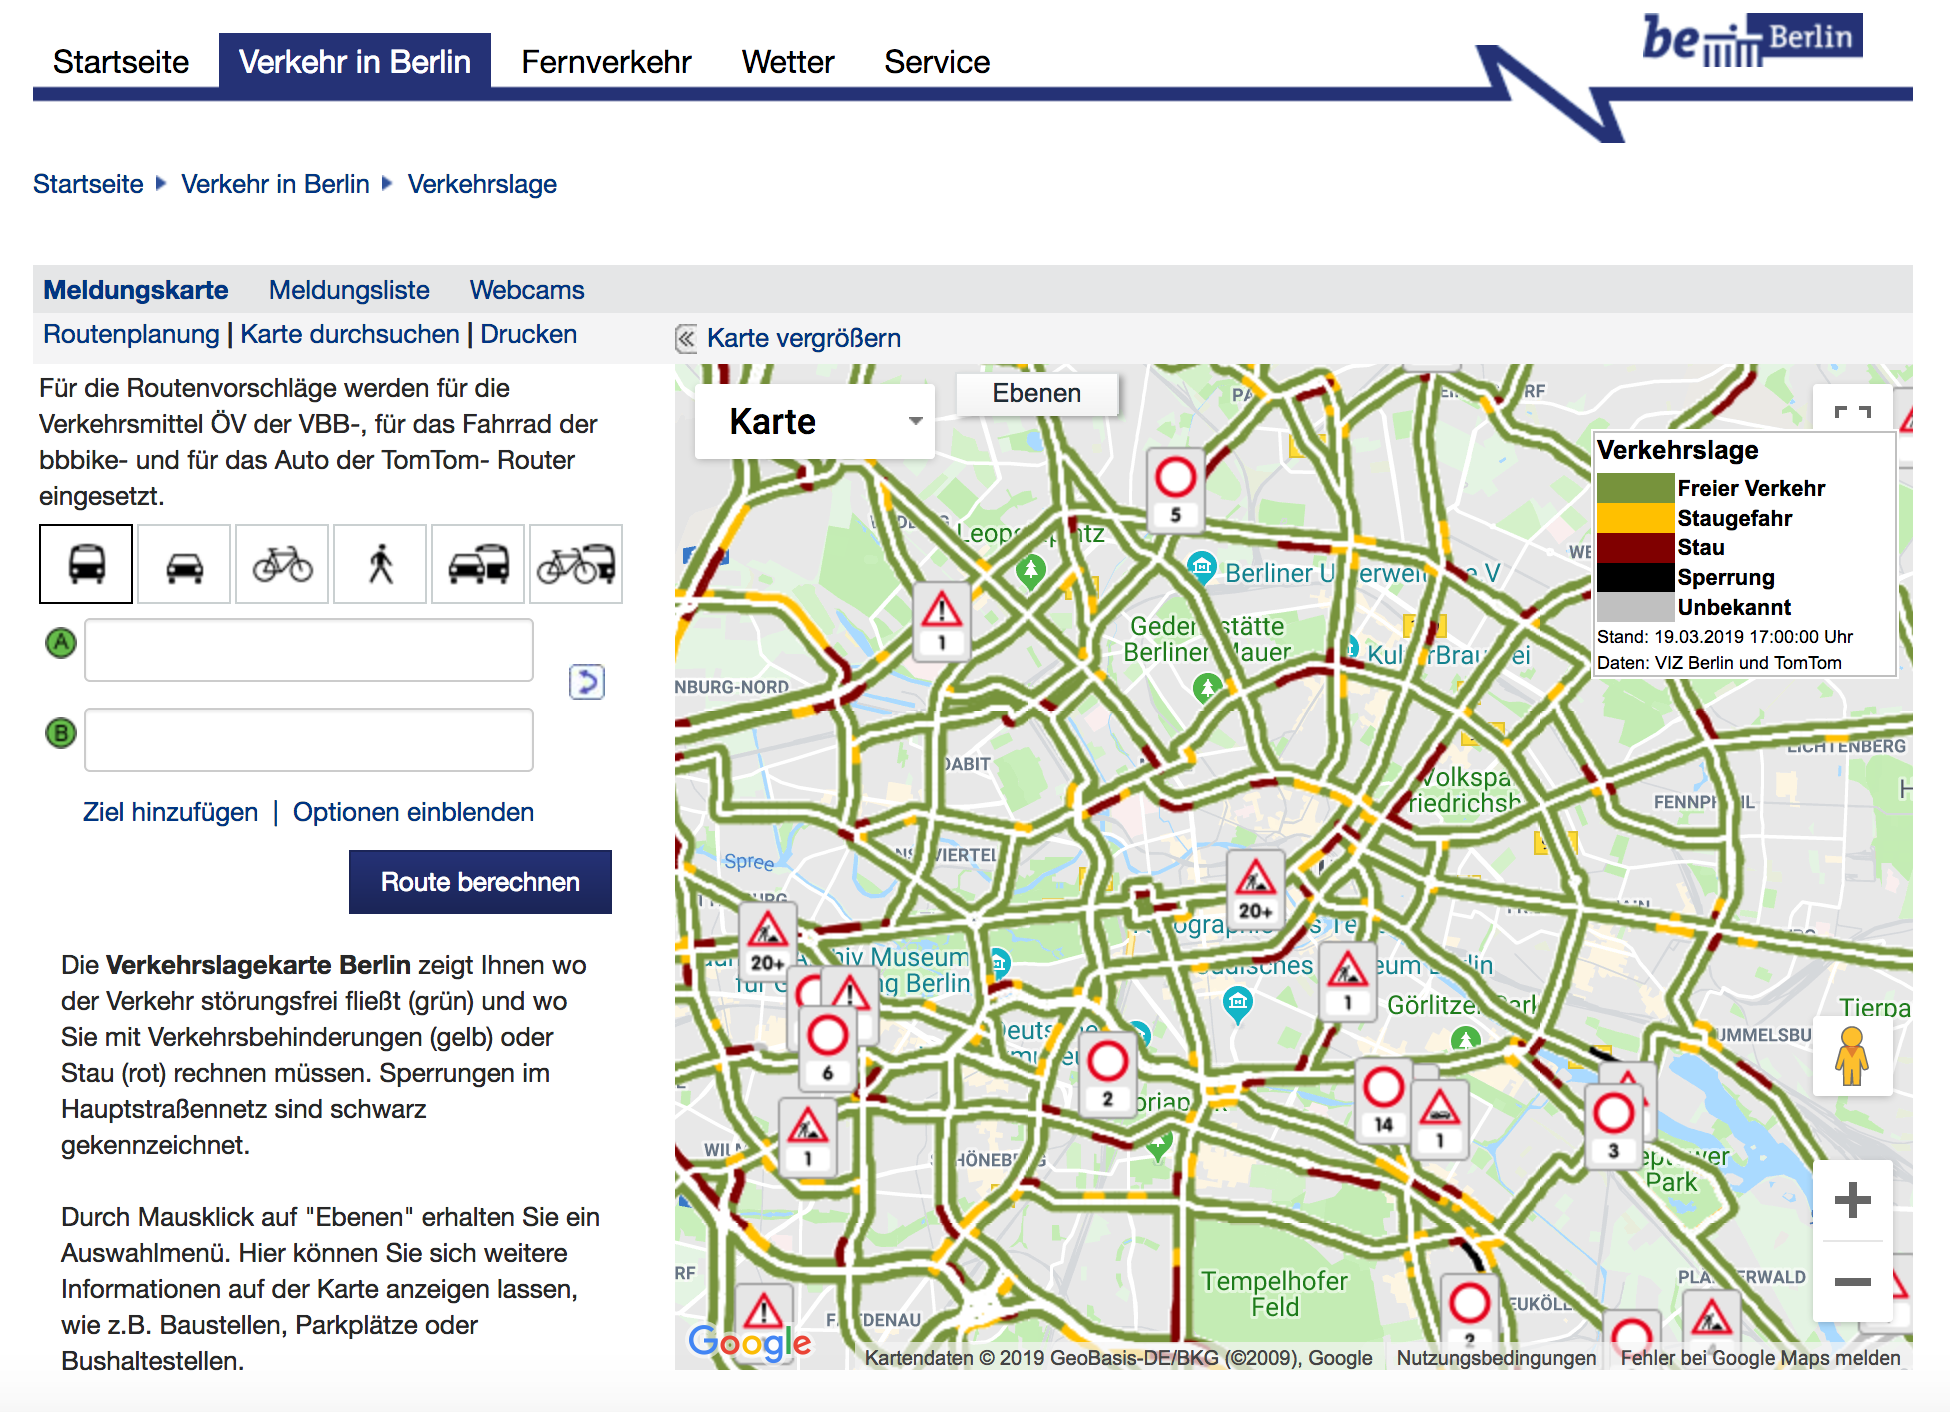 A map of current traffic and construction alerts in Berlin